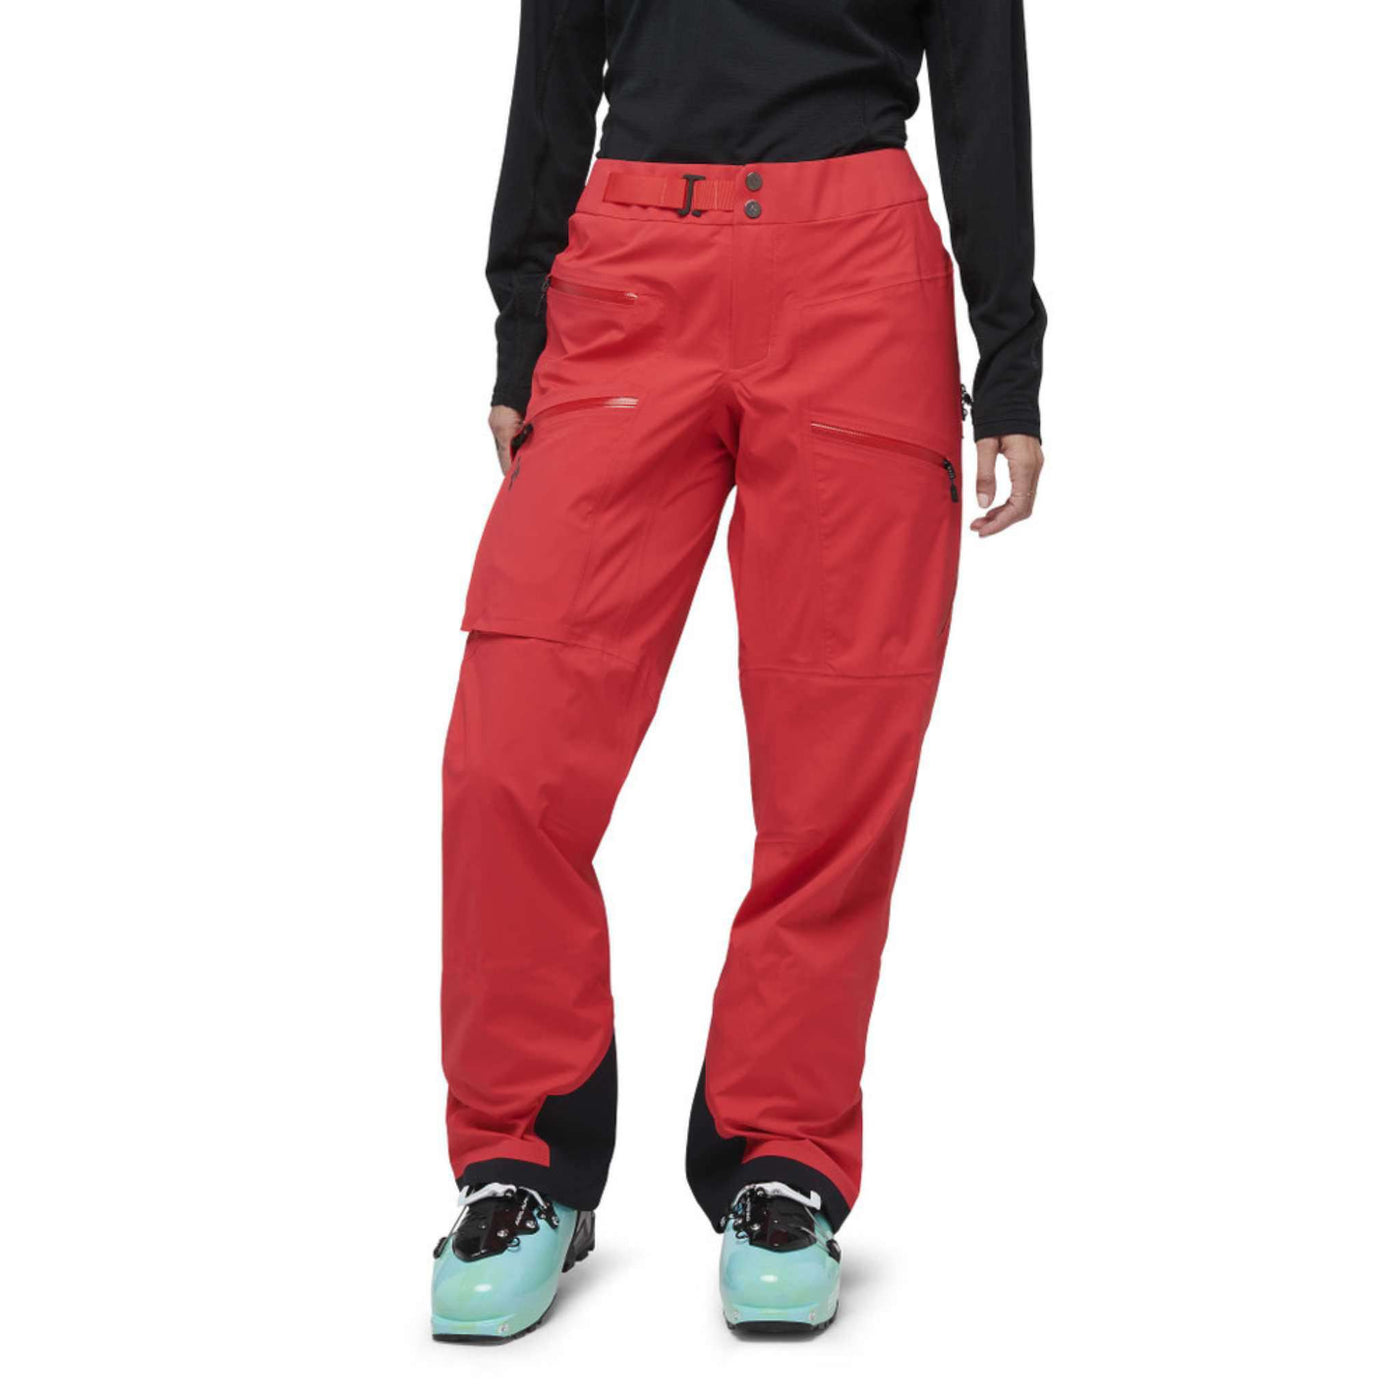 Black Diamond Recon LT Pants - Womens | Backcountry Ski and Snowboard Pants | Further Faster Christchurch NZ | #coral-red